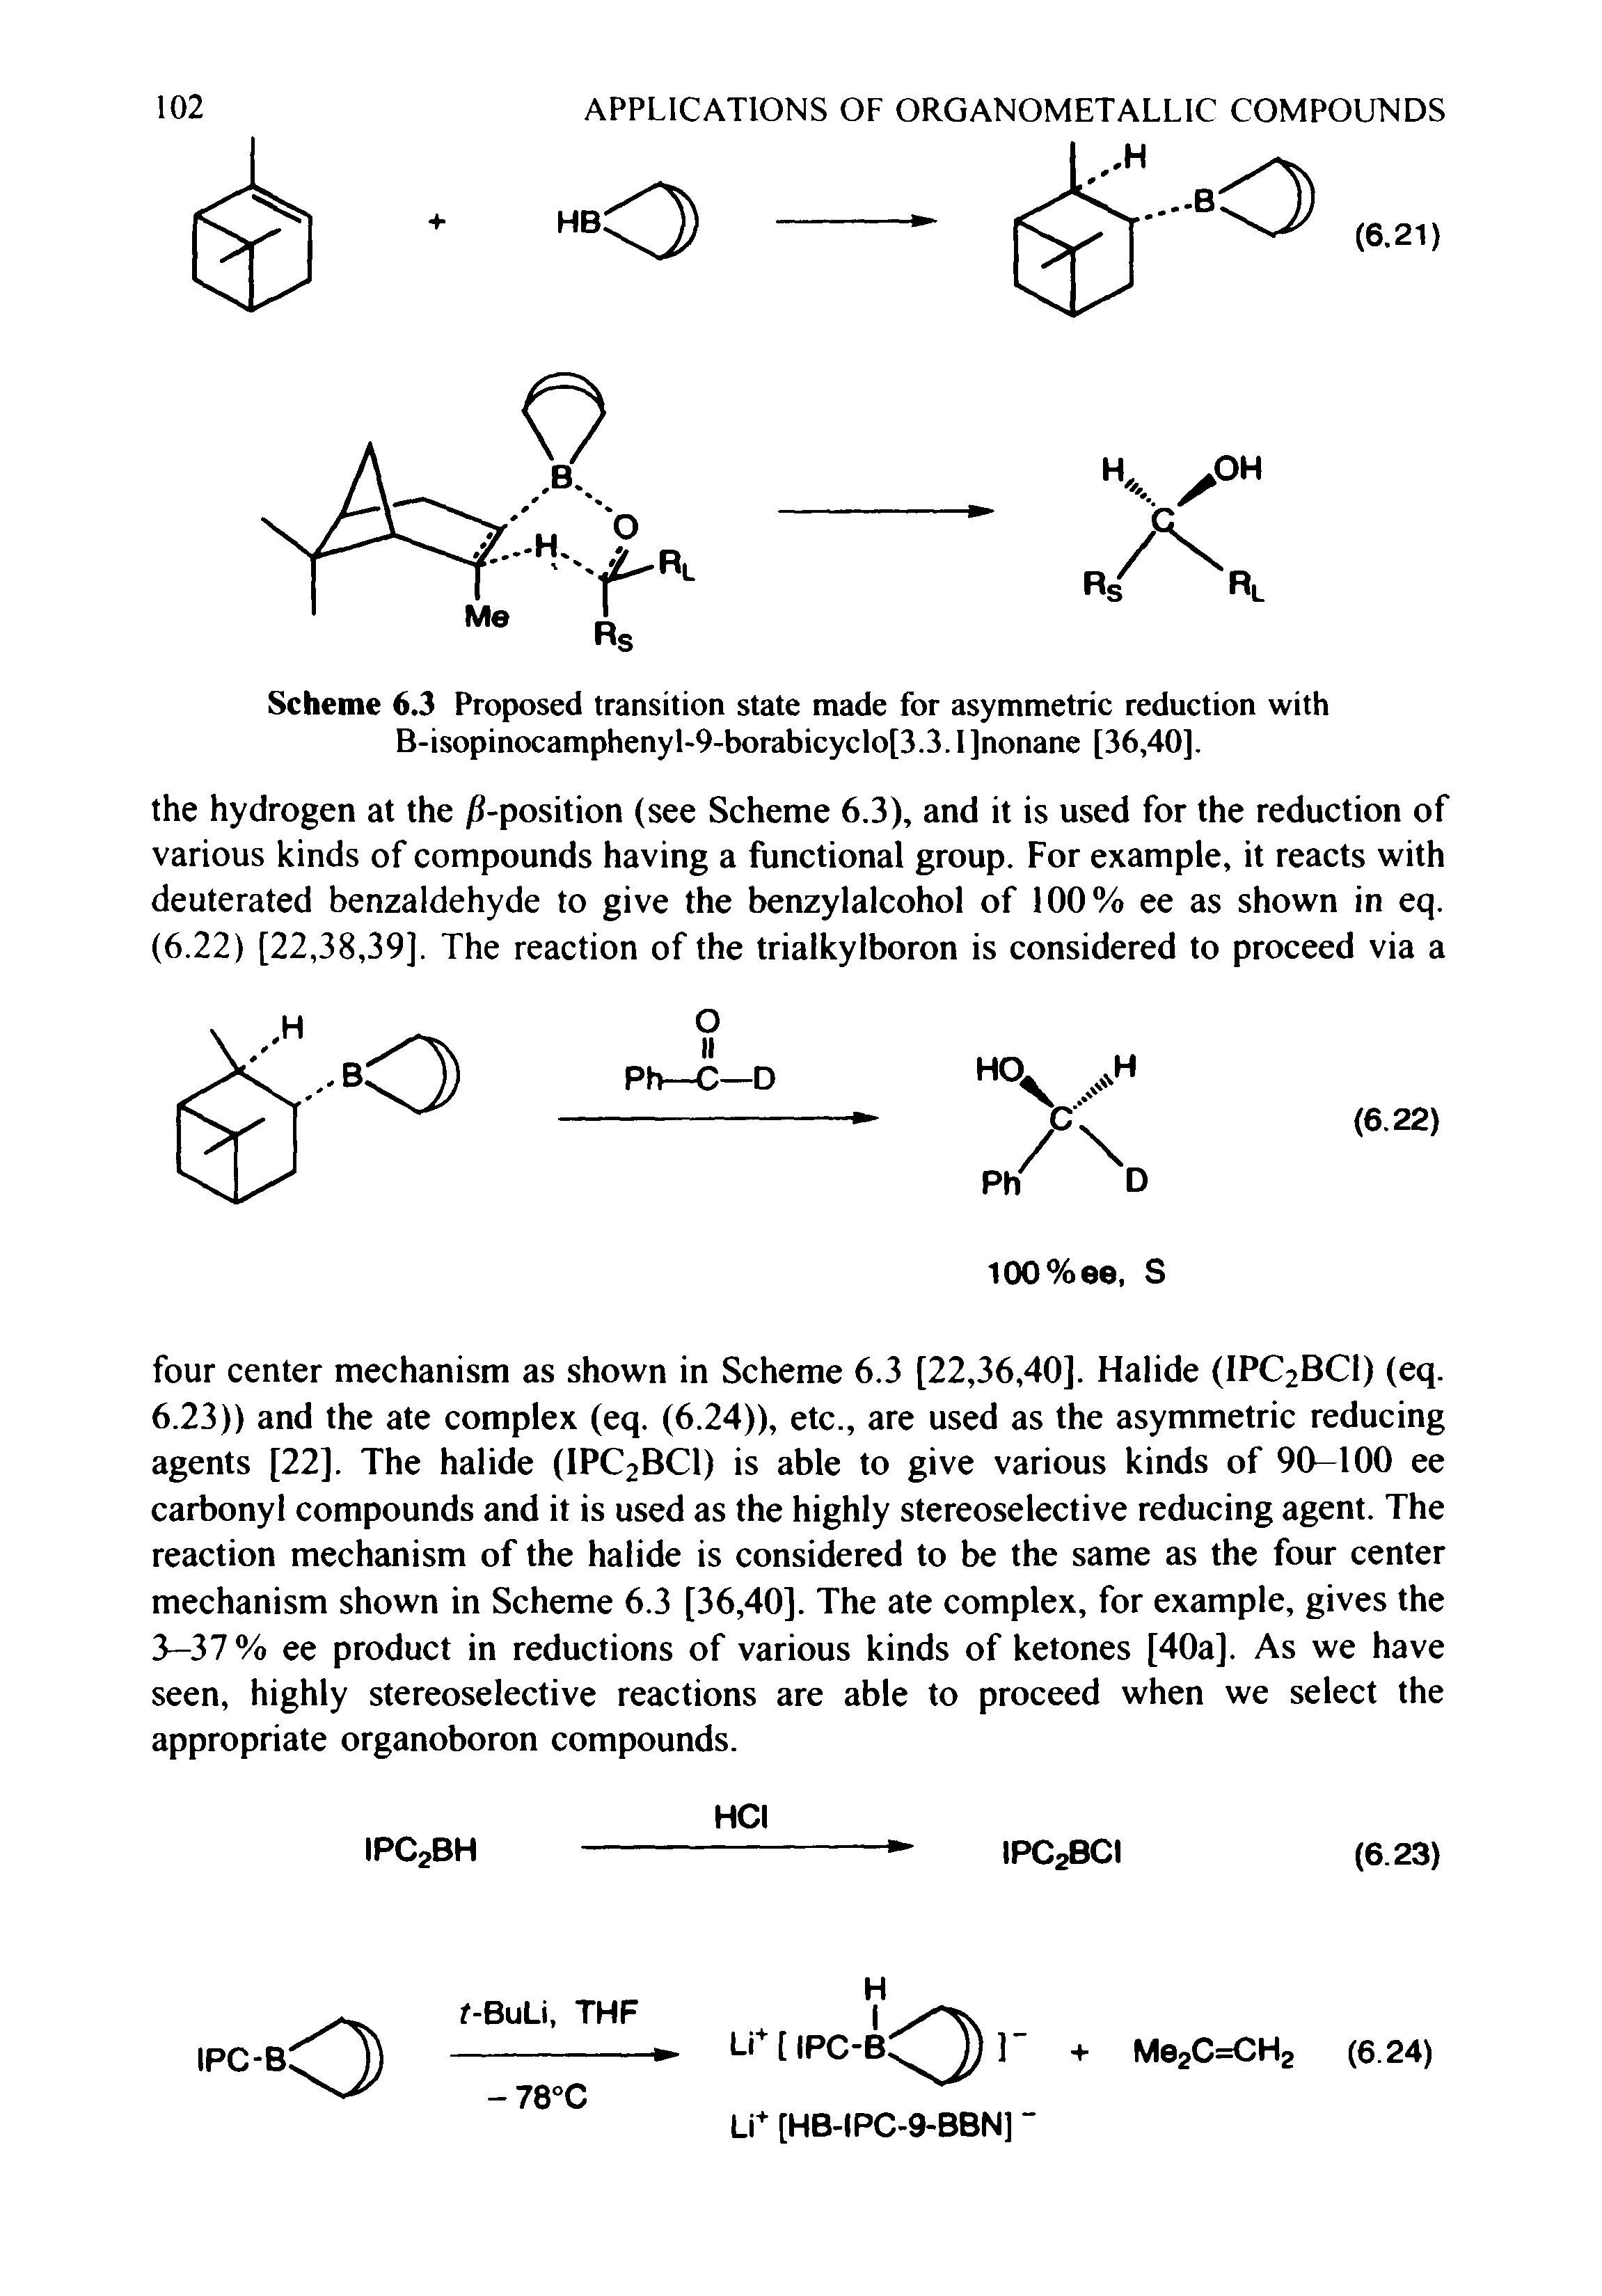 Scheme 6.3 Proposed transition state made for asymmetric reduction with B-isopinocamphenyl-9-borabicyclo[3.3.I]nonane [36,40],...